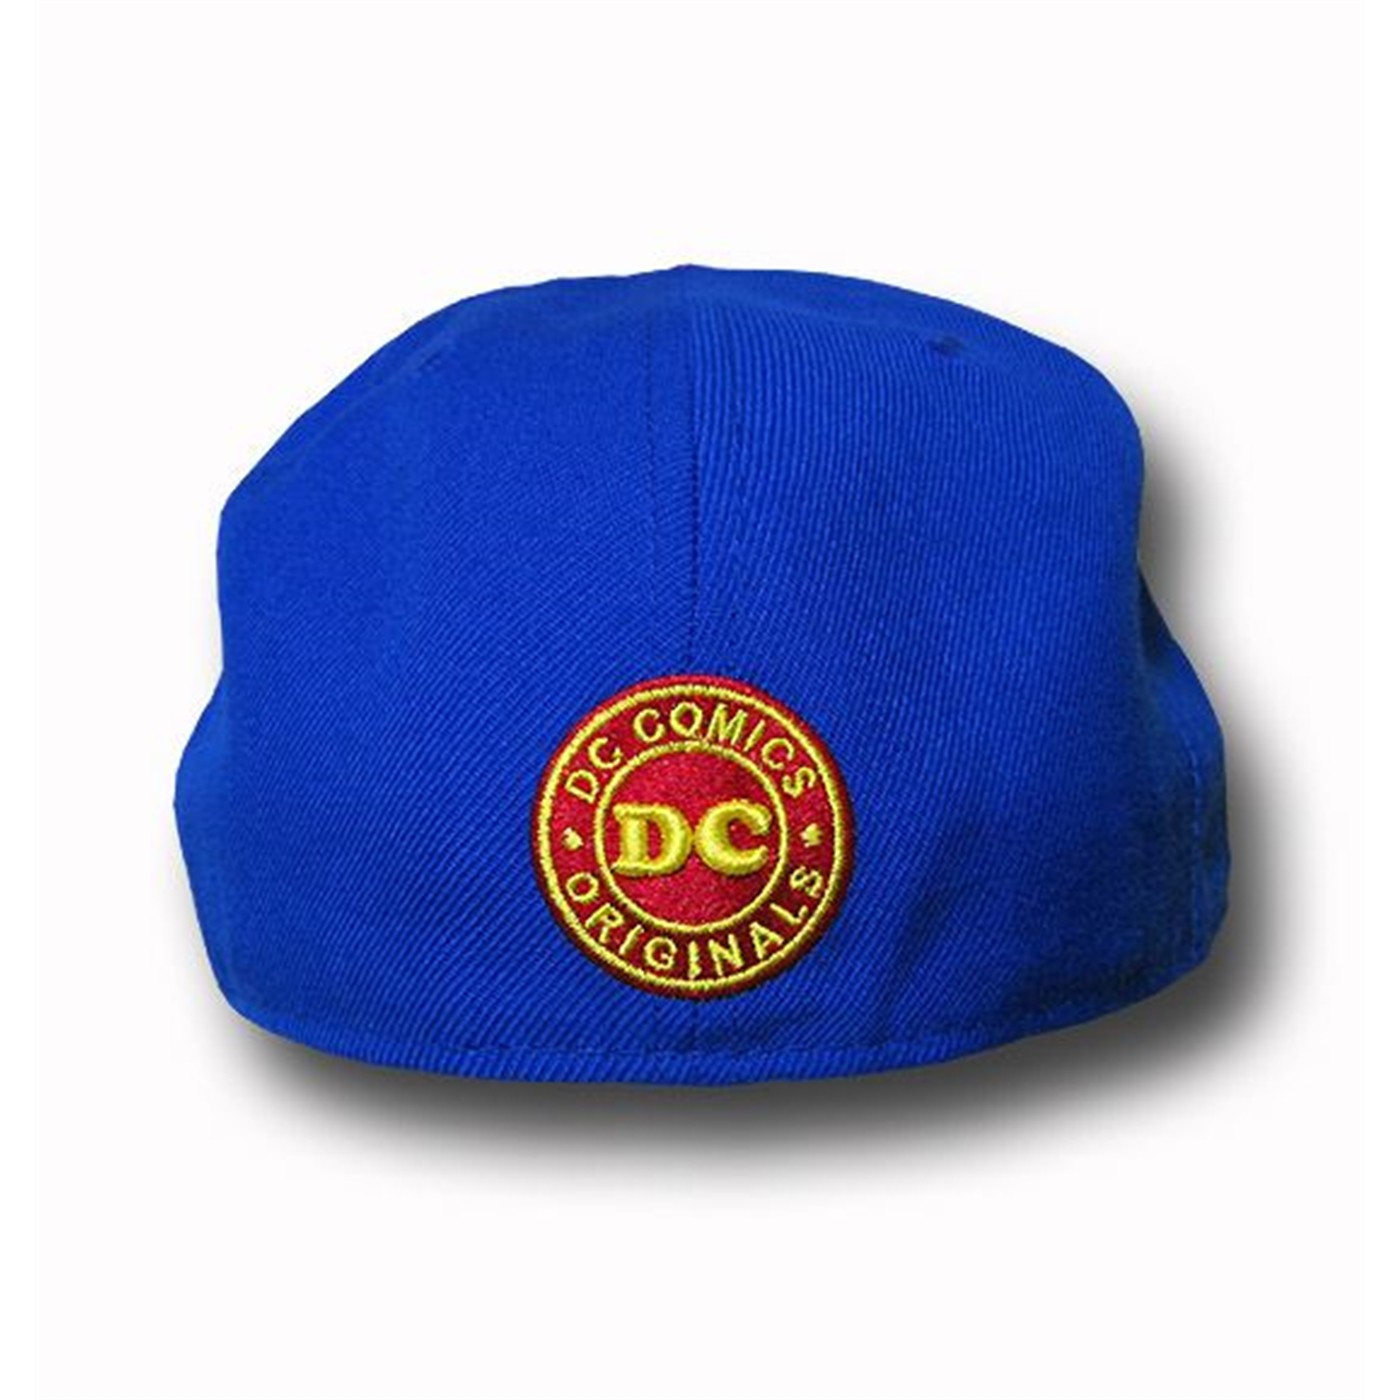 Superman 59Fifty Symbol Blue with Red Flat Bill Cap